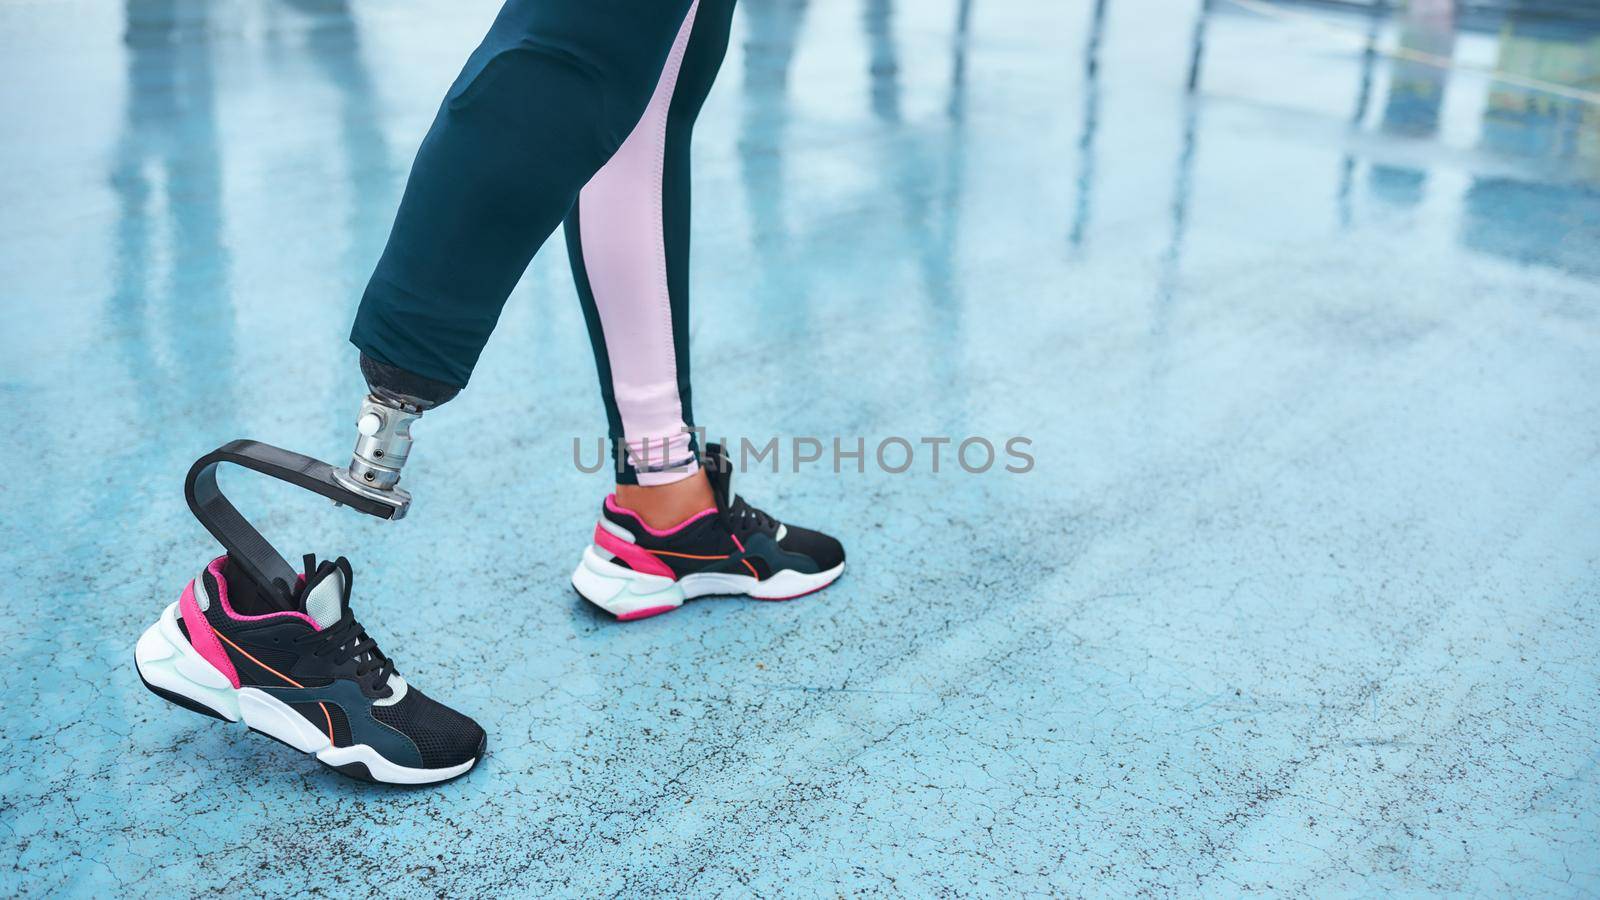 Wake up and workout. Cropped image of disabled athlete woman with prosthetic leg standing on stadium by friendsstock